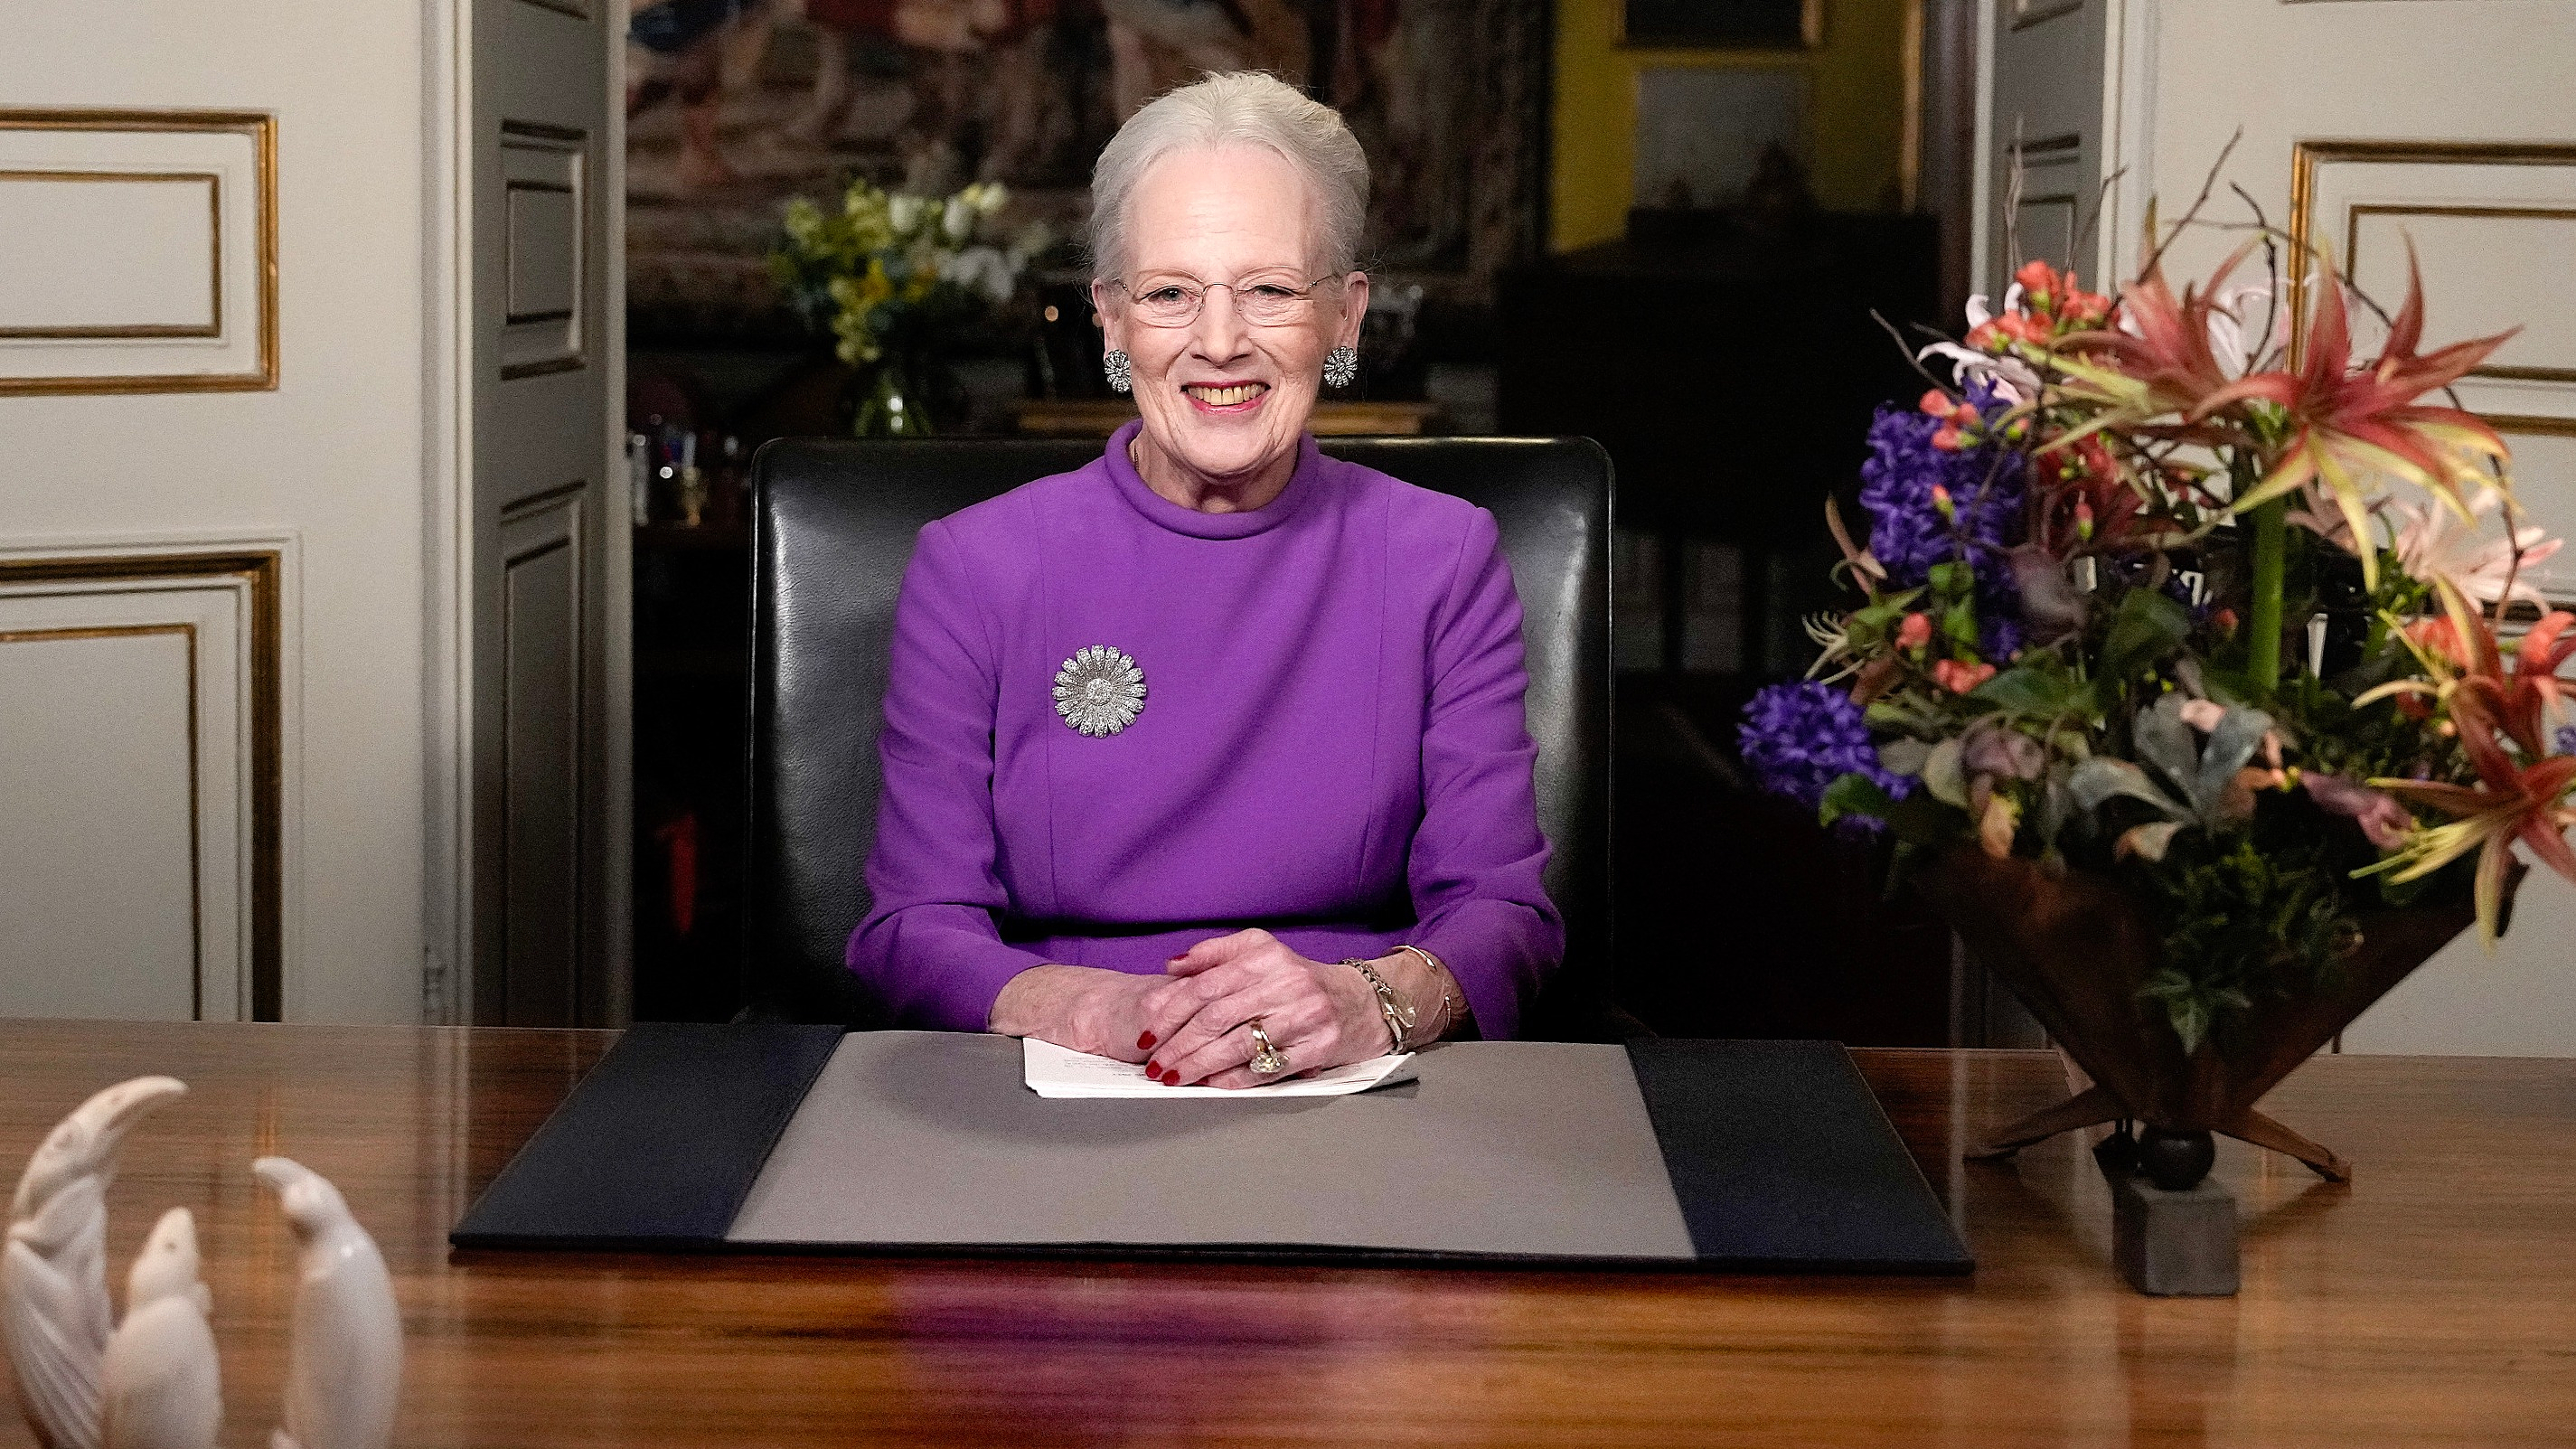 Queen Margrethe wins the Danish equivalent of the “Oscar” for best costume